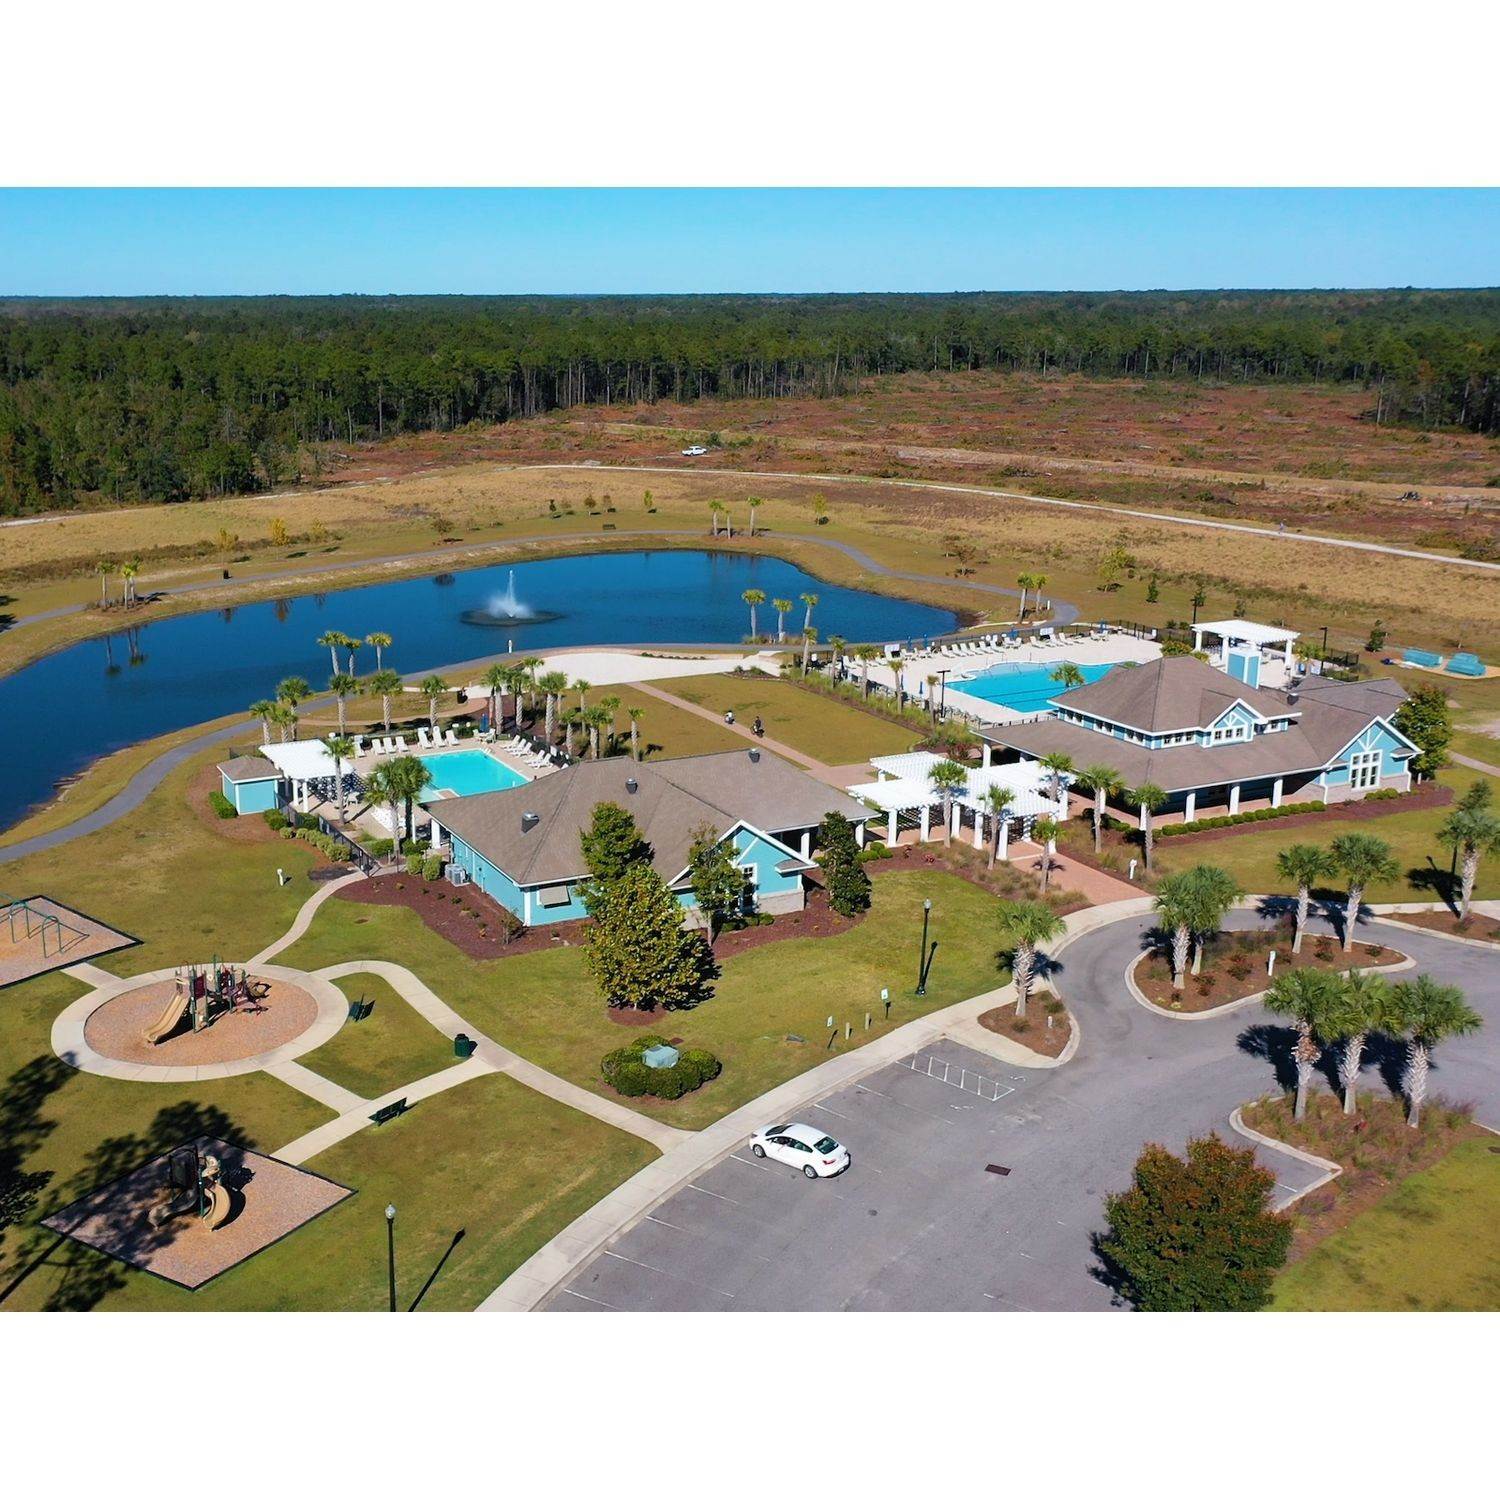 15. Clear Pond - The Boardwalk Series xây dựng tại 4716 Hopespring Street, Myrtle Beach, SC 29579